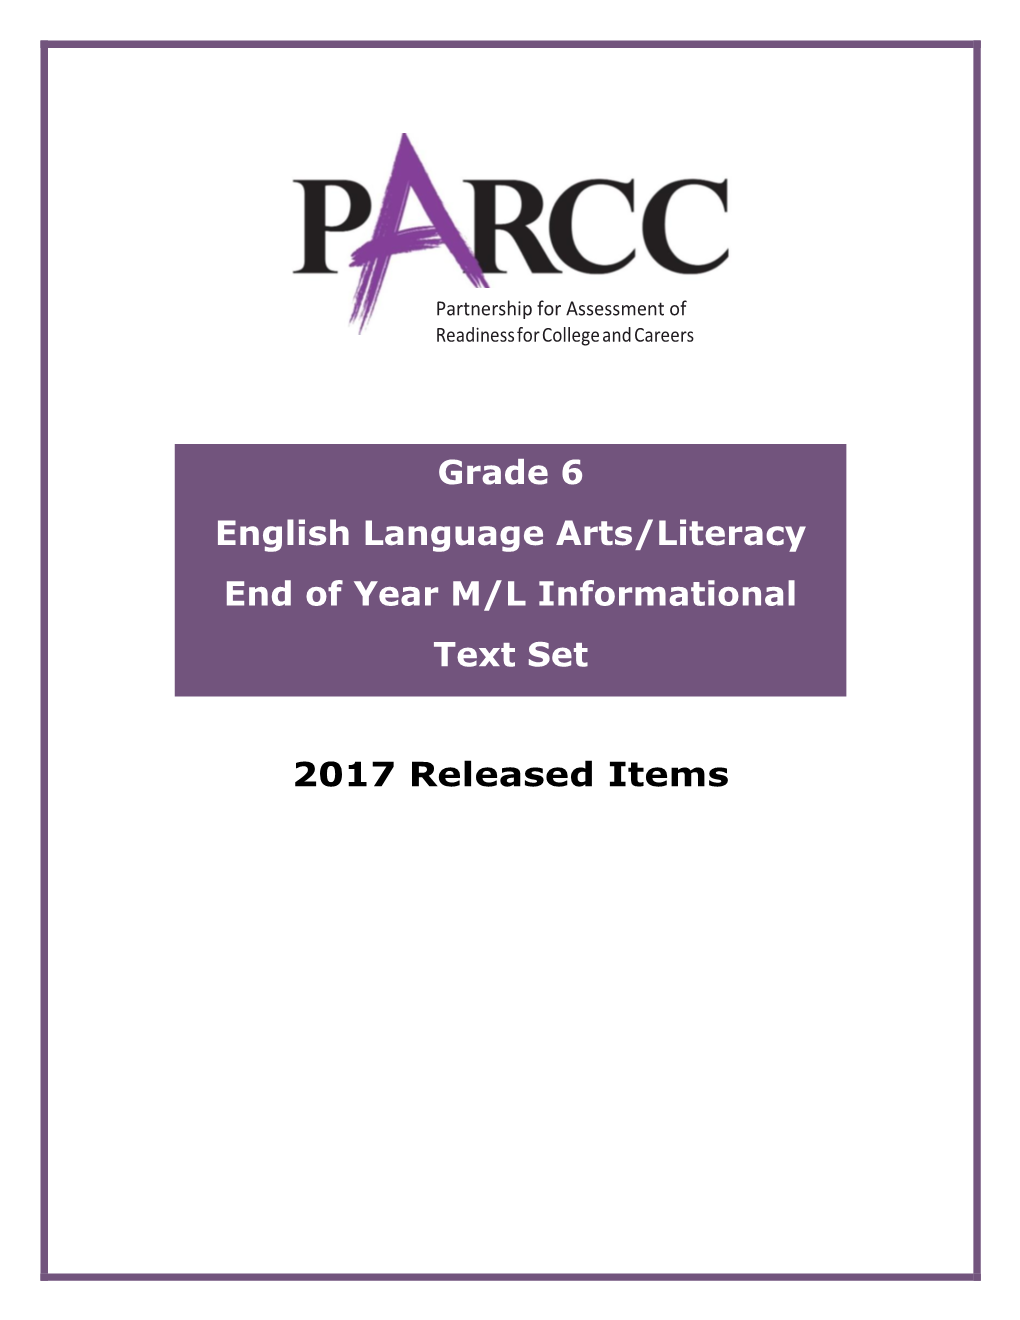 Grade 6 M/L Informational Text Set Includes Evidence-Based Selected Response/ Technology-Enhanced Constructed Response Items